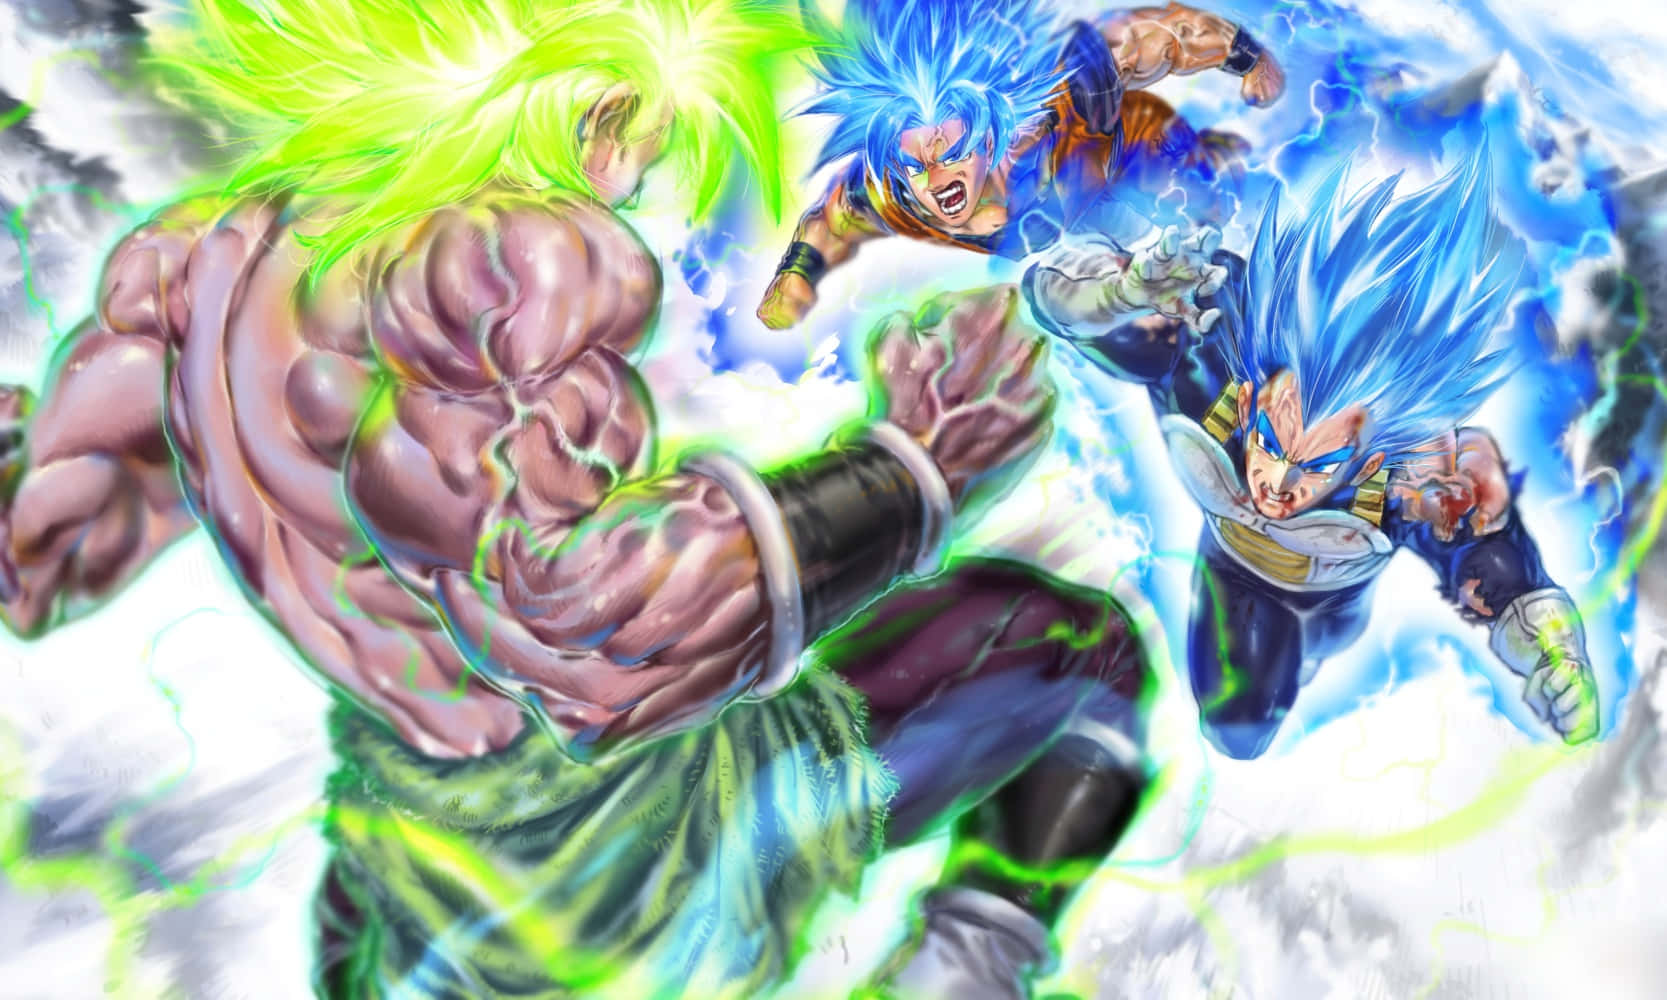 Goku and Vegeta battle against Broly in Dragon Ball Super Broly.